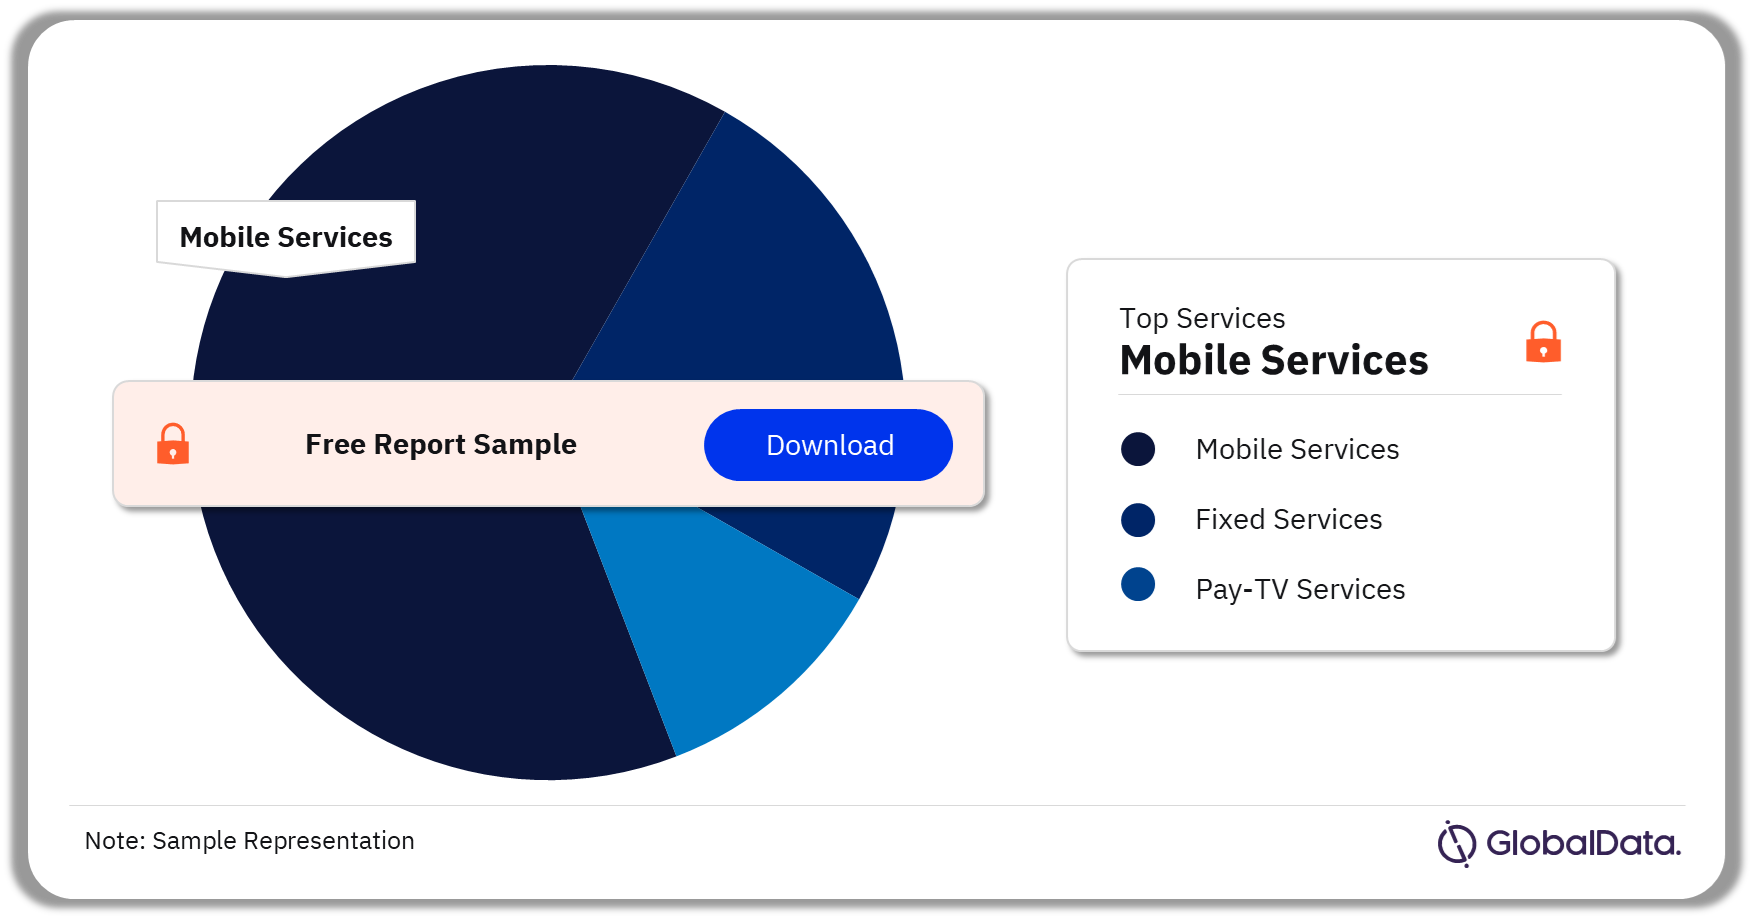 United States Telecom Services Market Share by Service, 2022 (%)